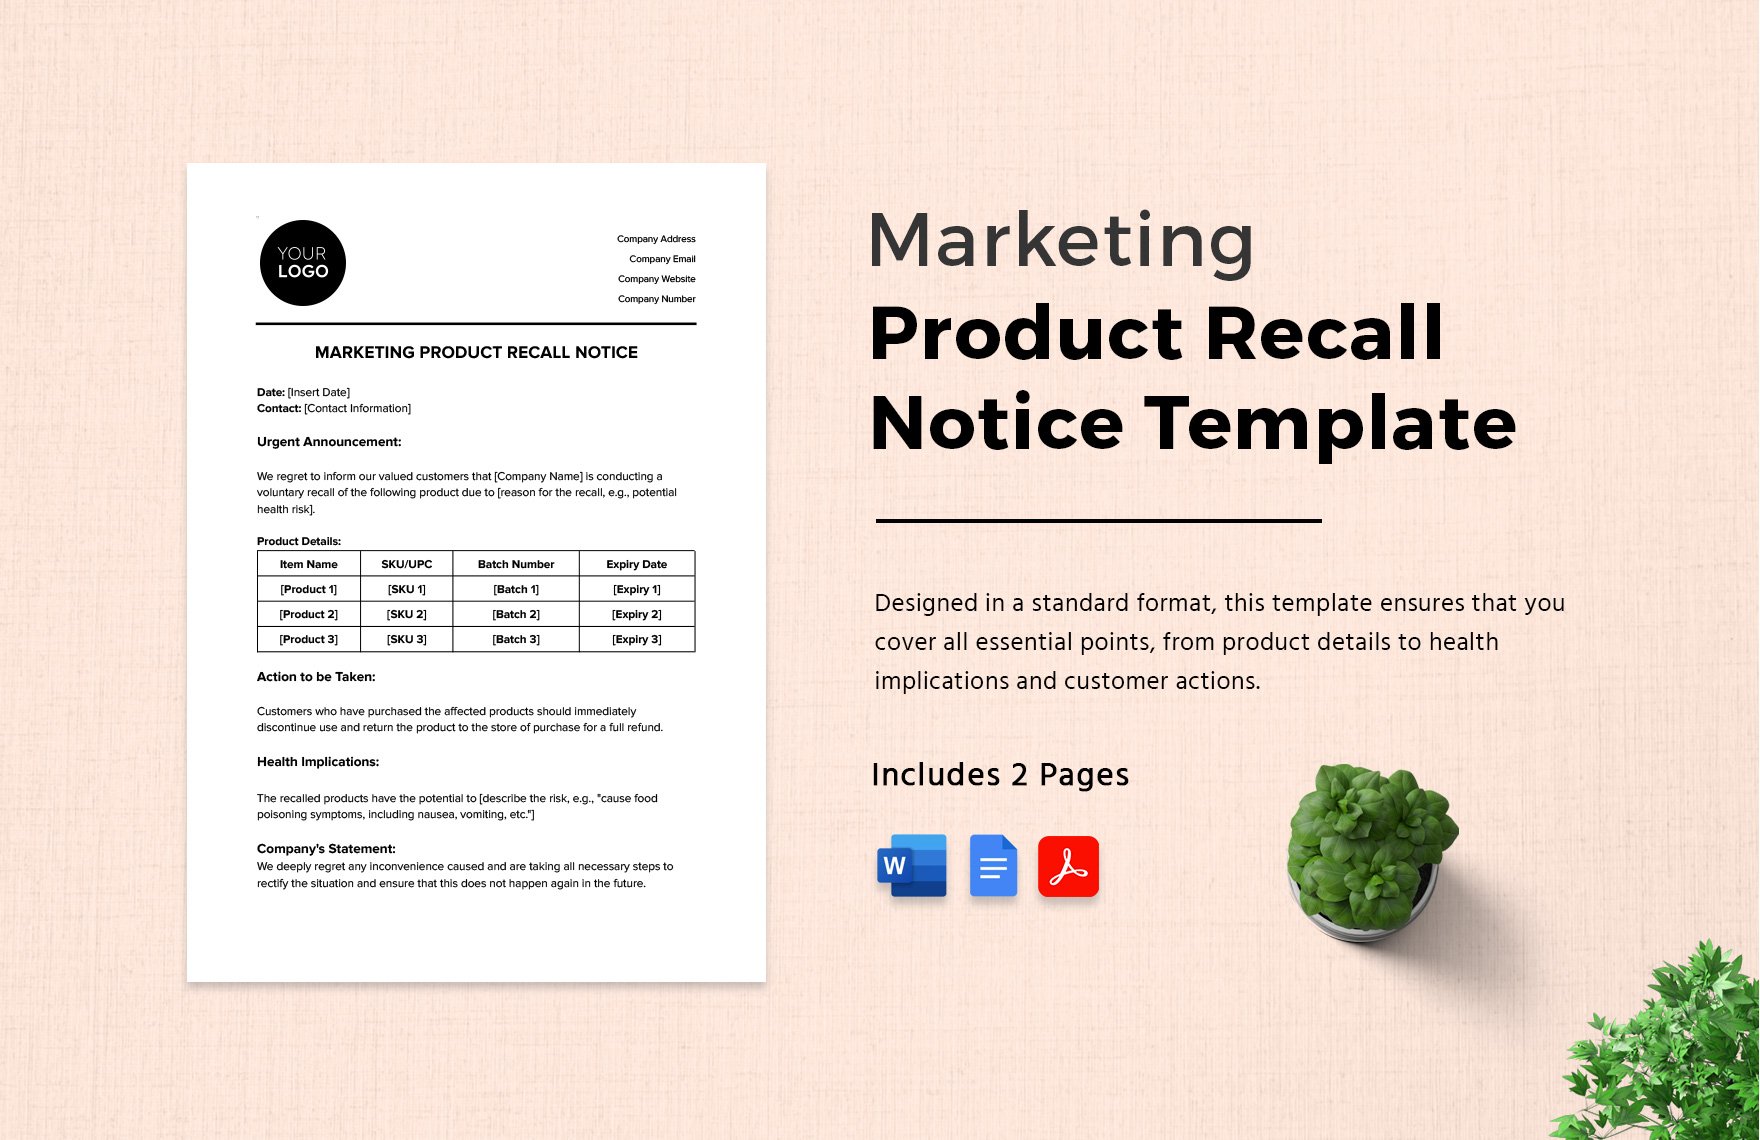 Marketing Product Recall Notice Template